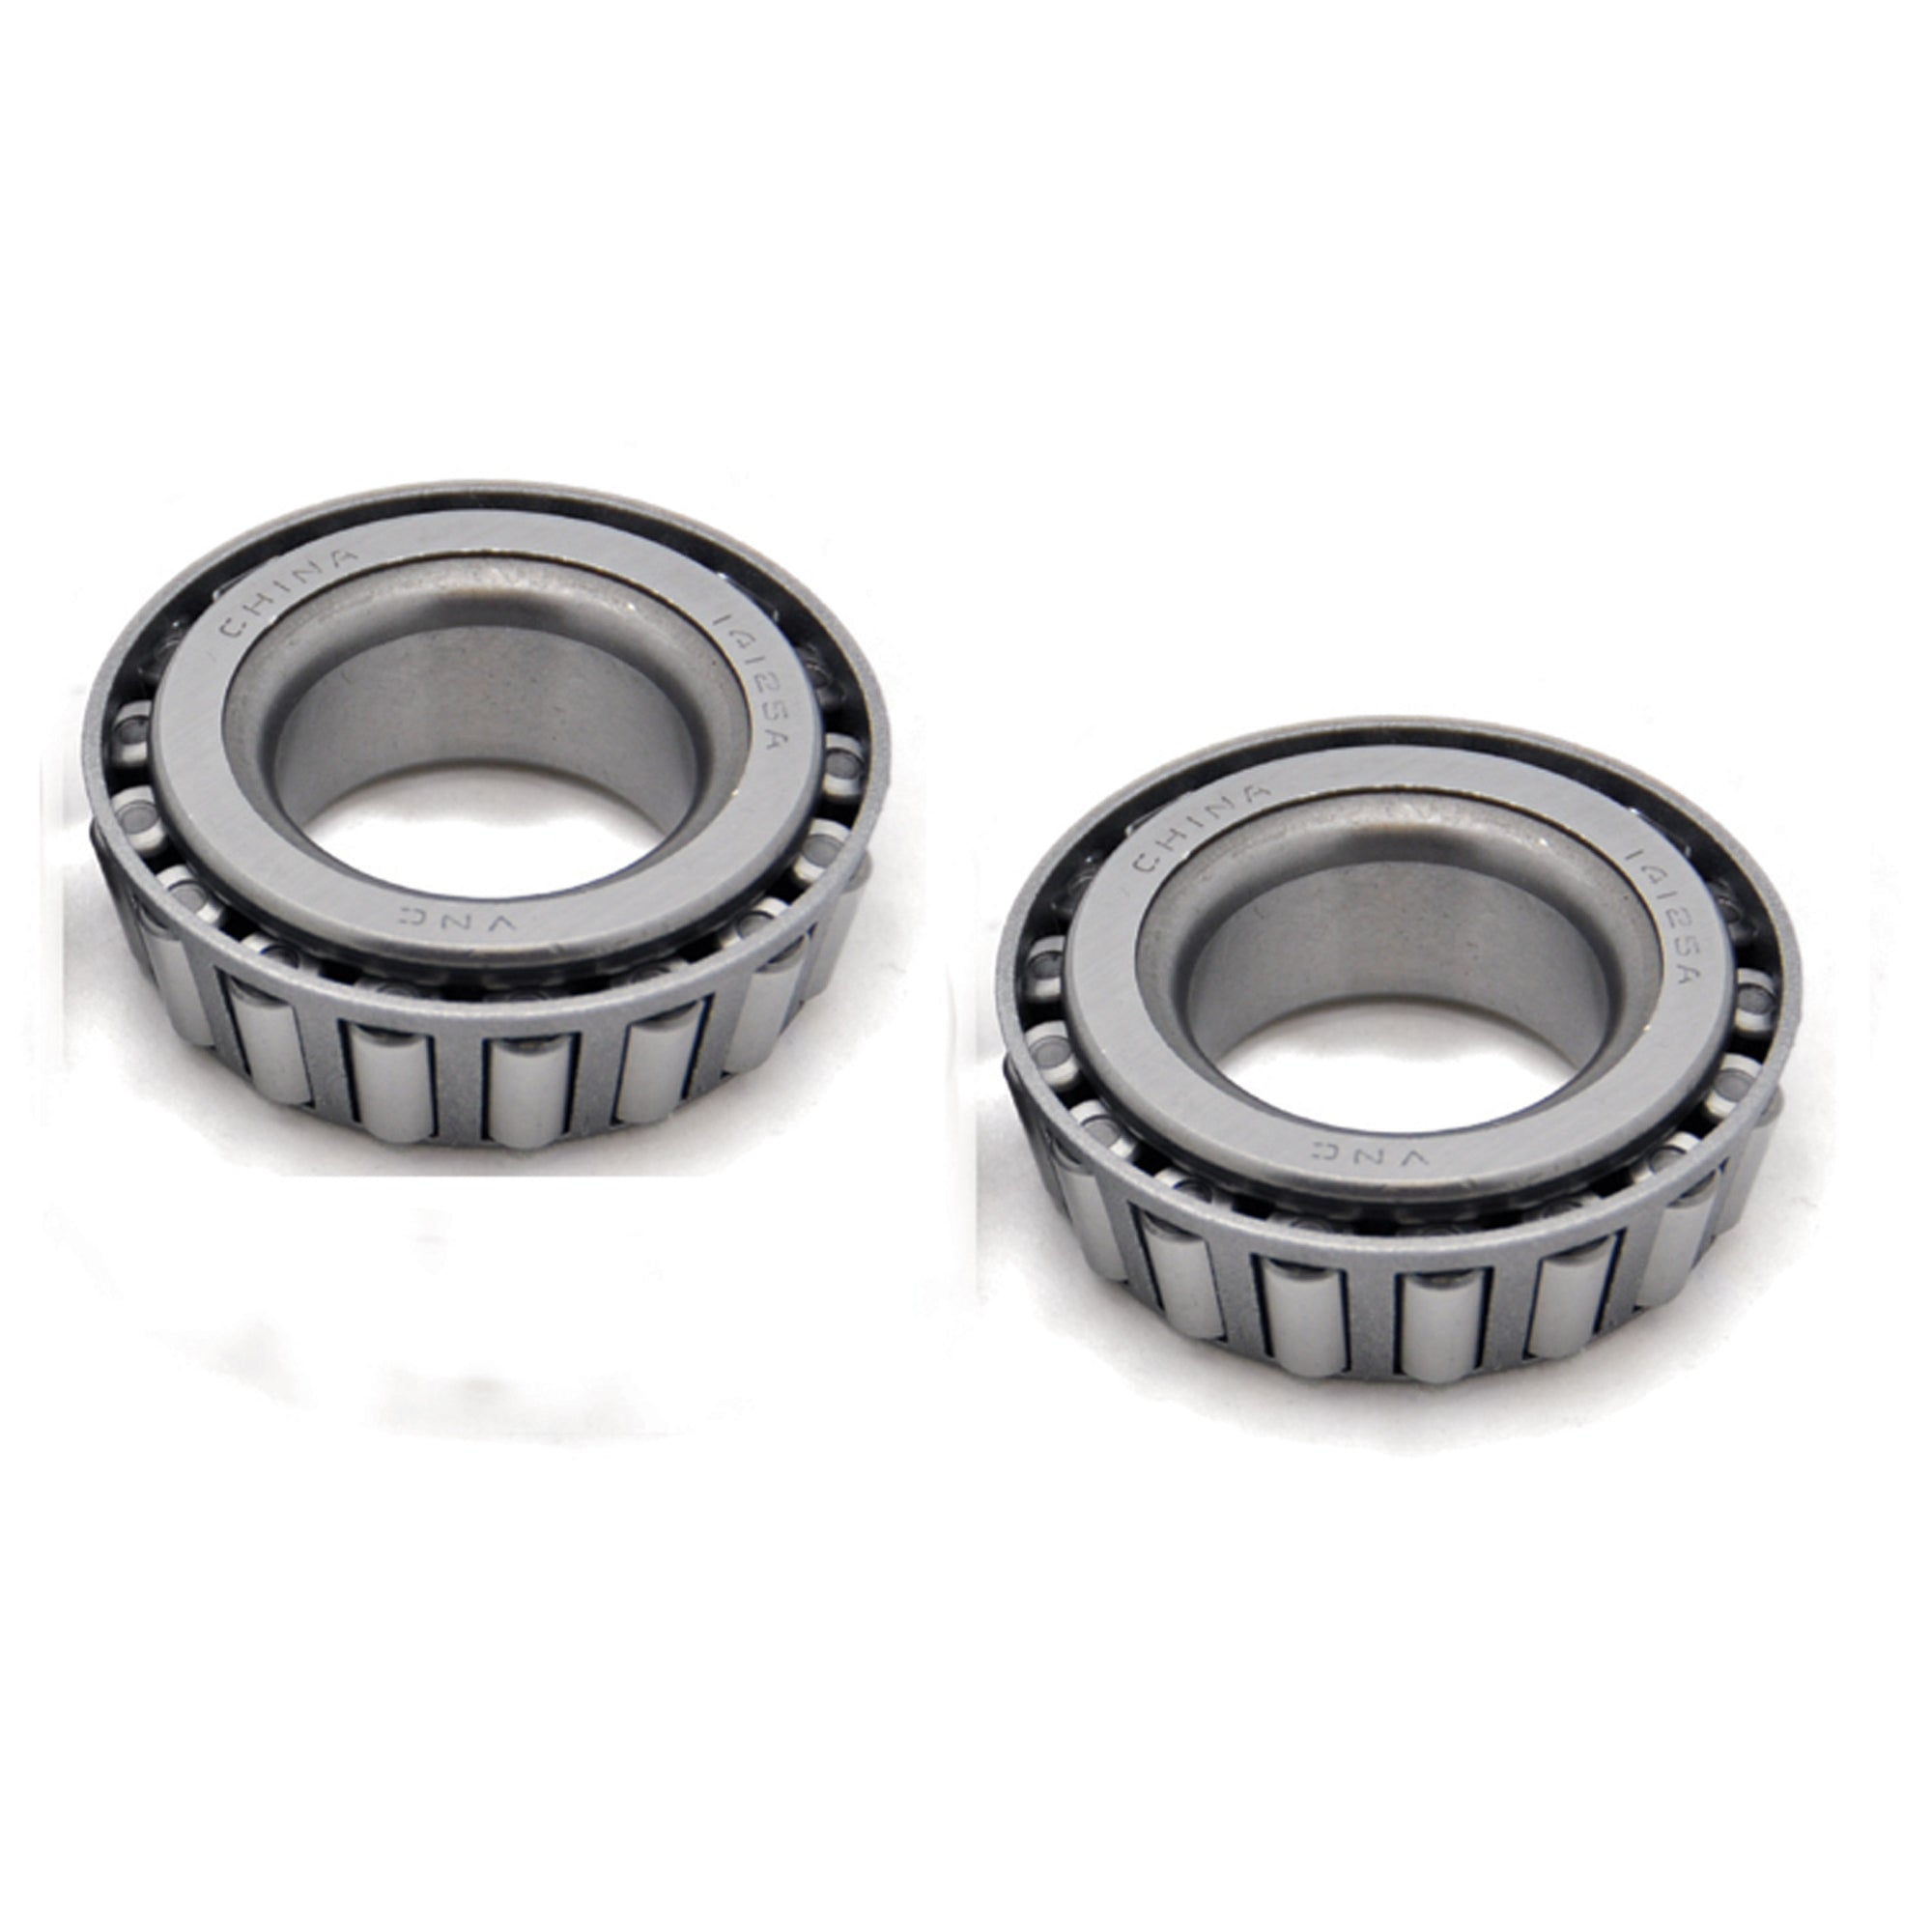 AP Products 014-127009-8 Outer Bearing 114125A - 8 Pack